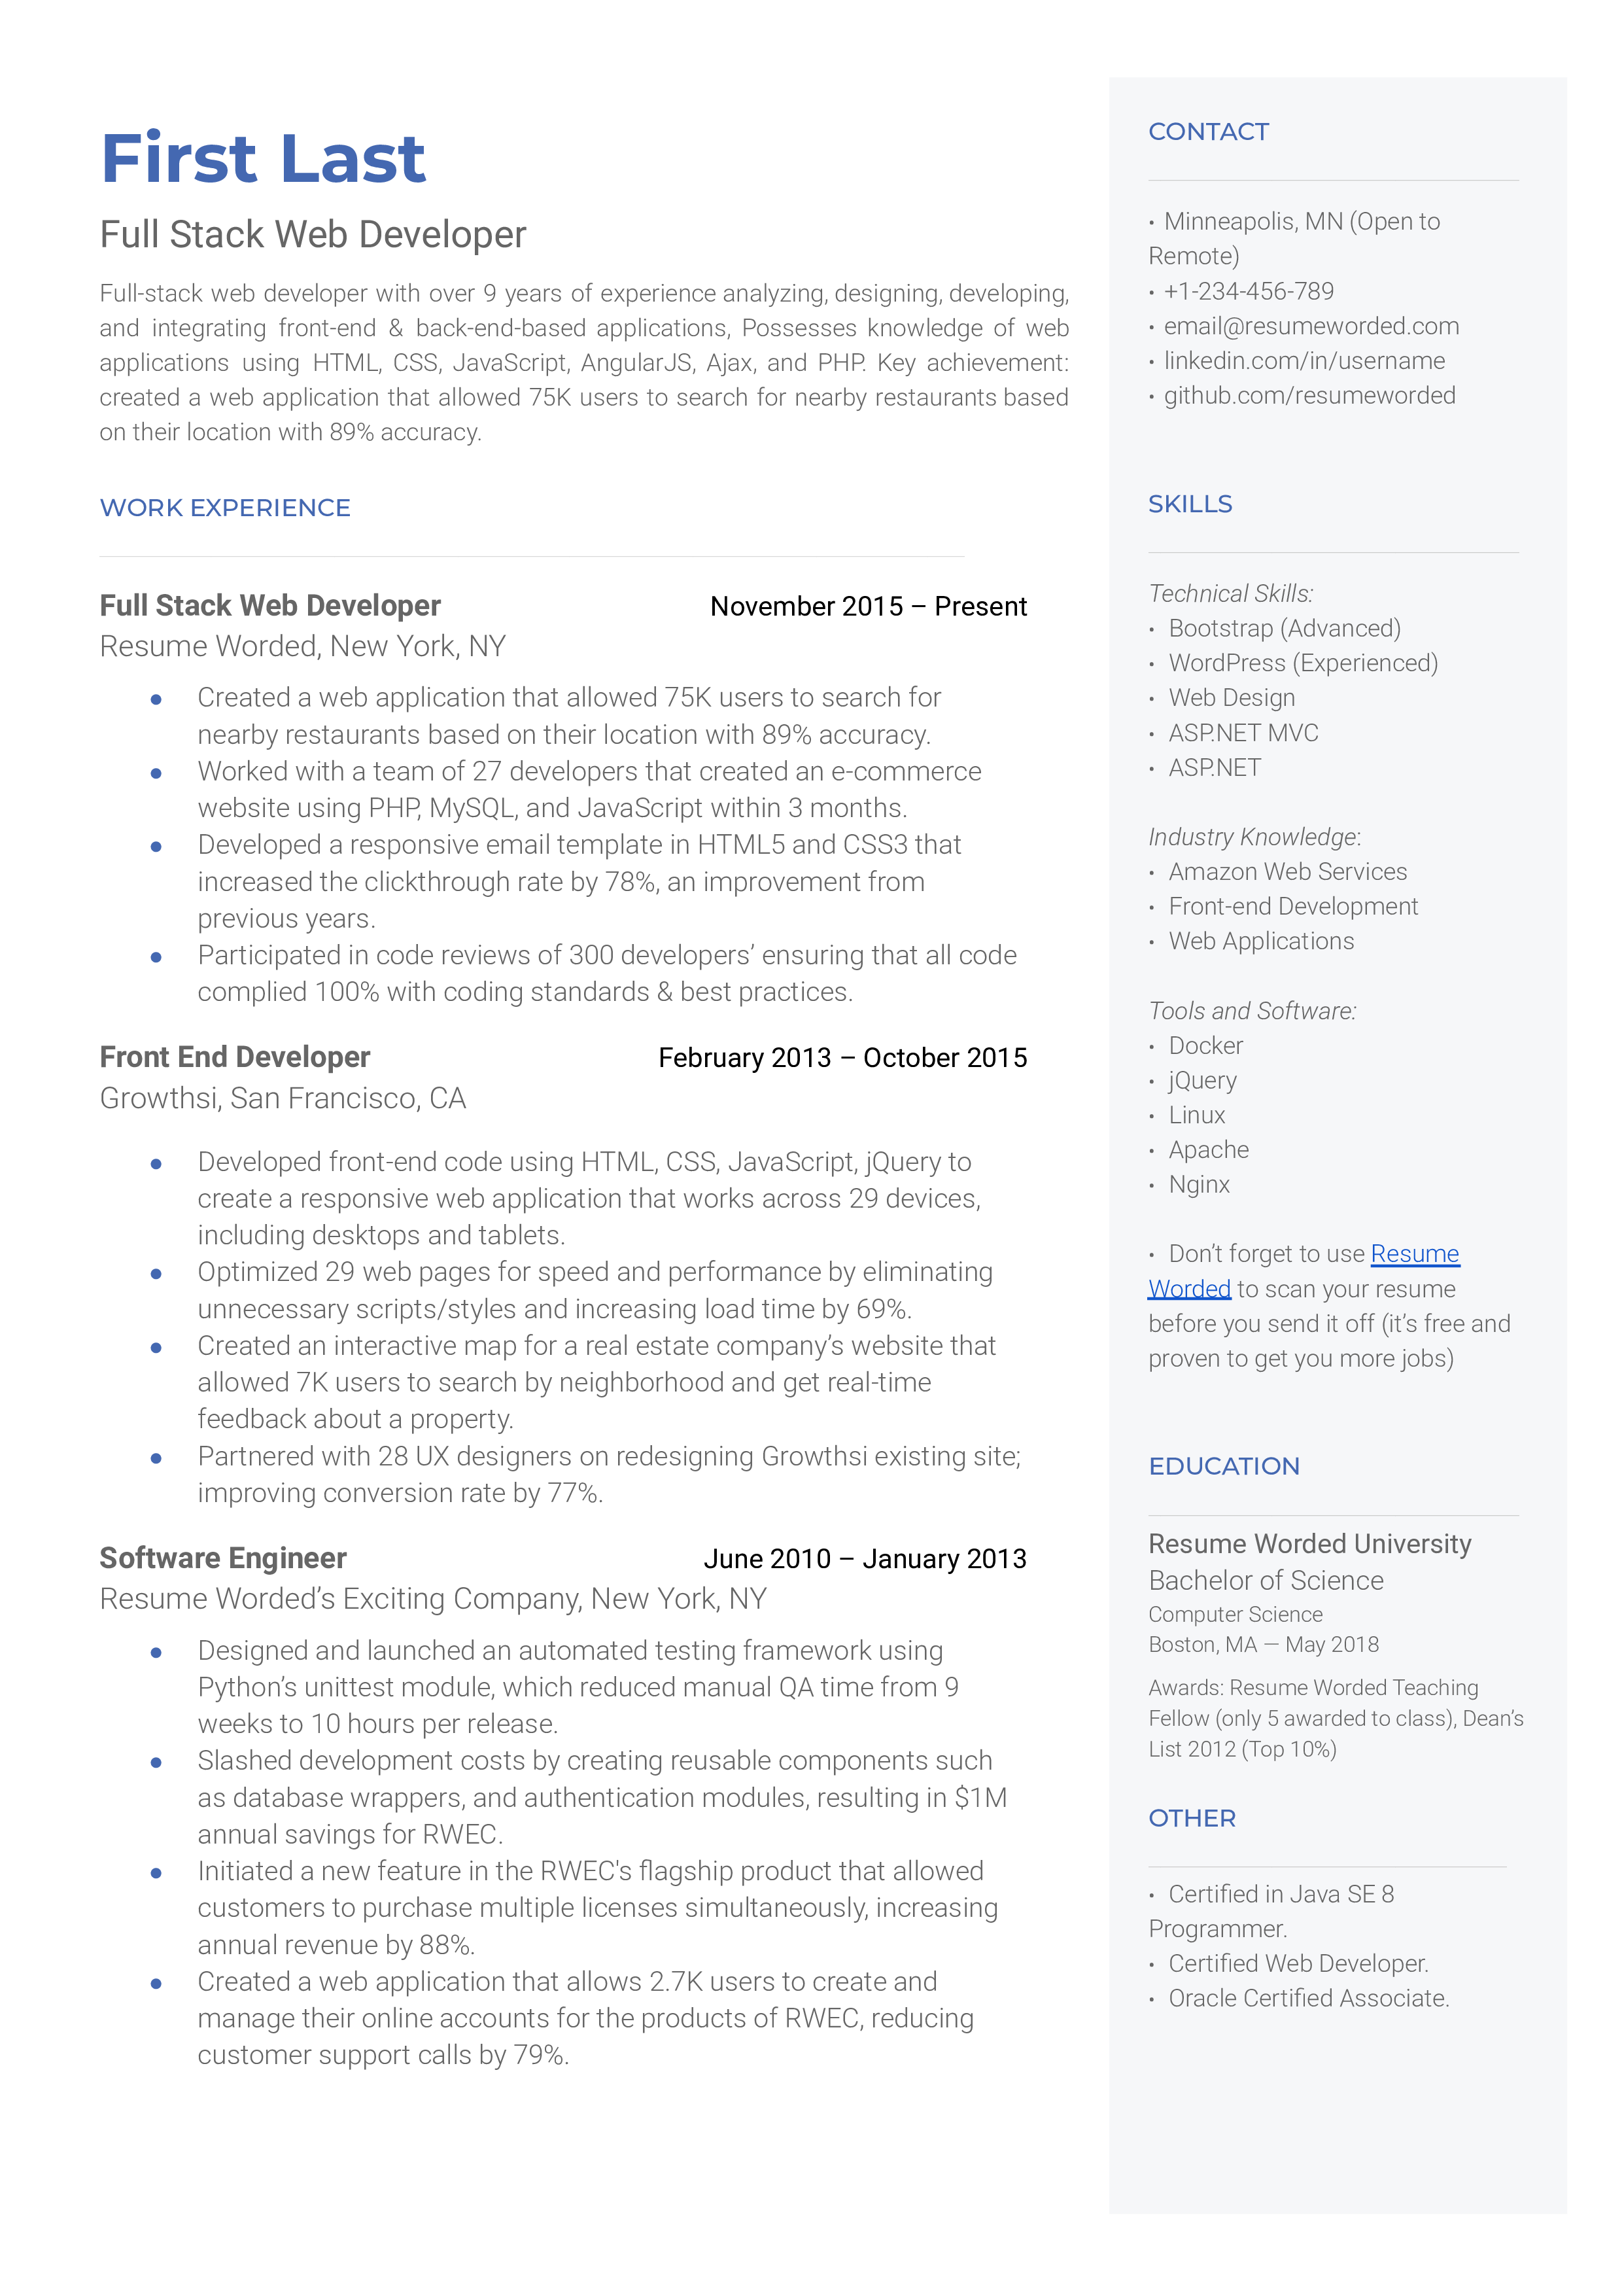 A CV for a Full Stack Developer showcasing programming languages and real-life problem-solving experiences.